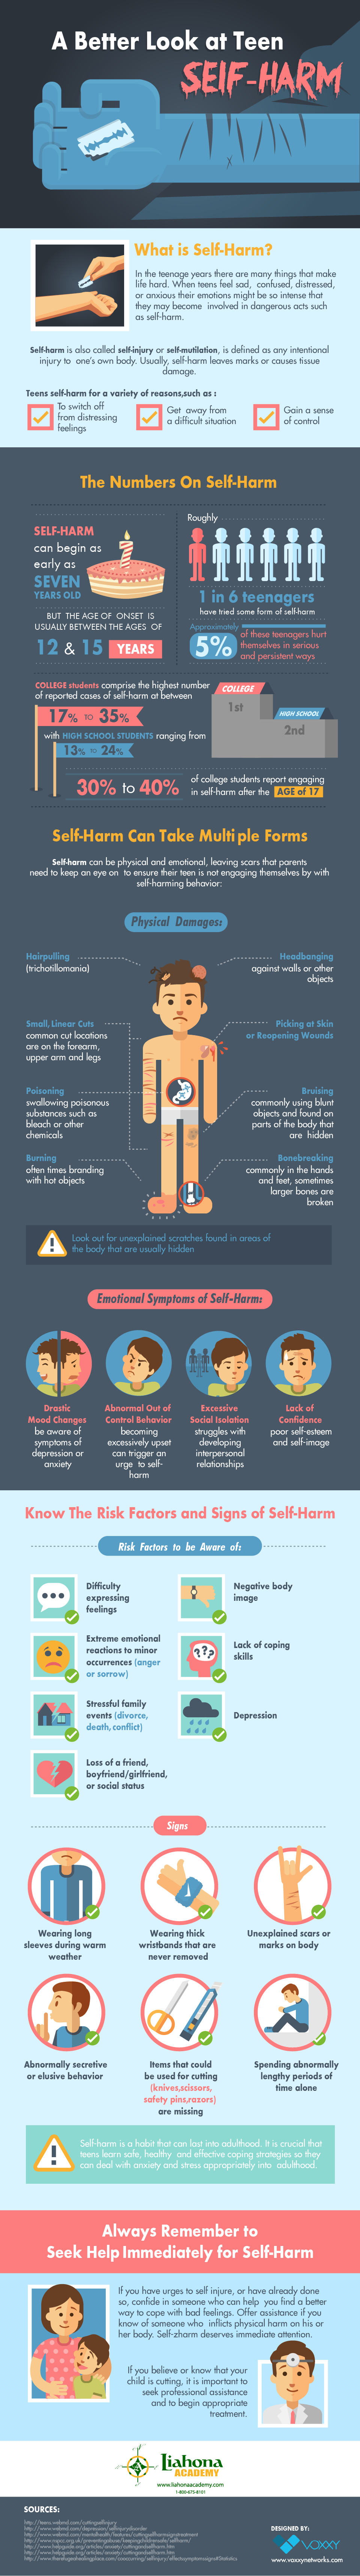 a-better-look-at-teen-self-harm-infographic